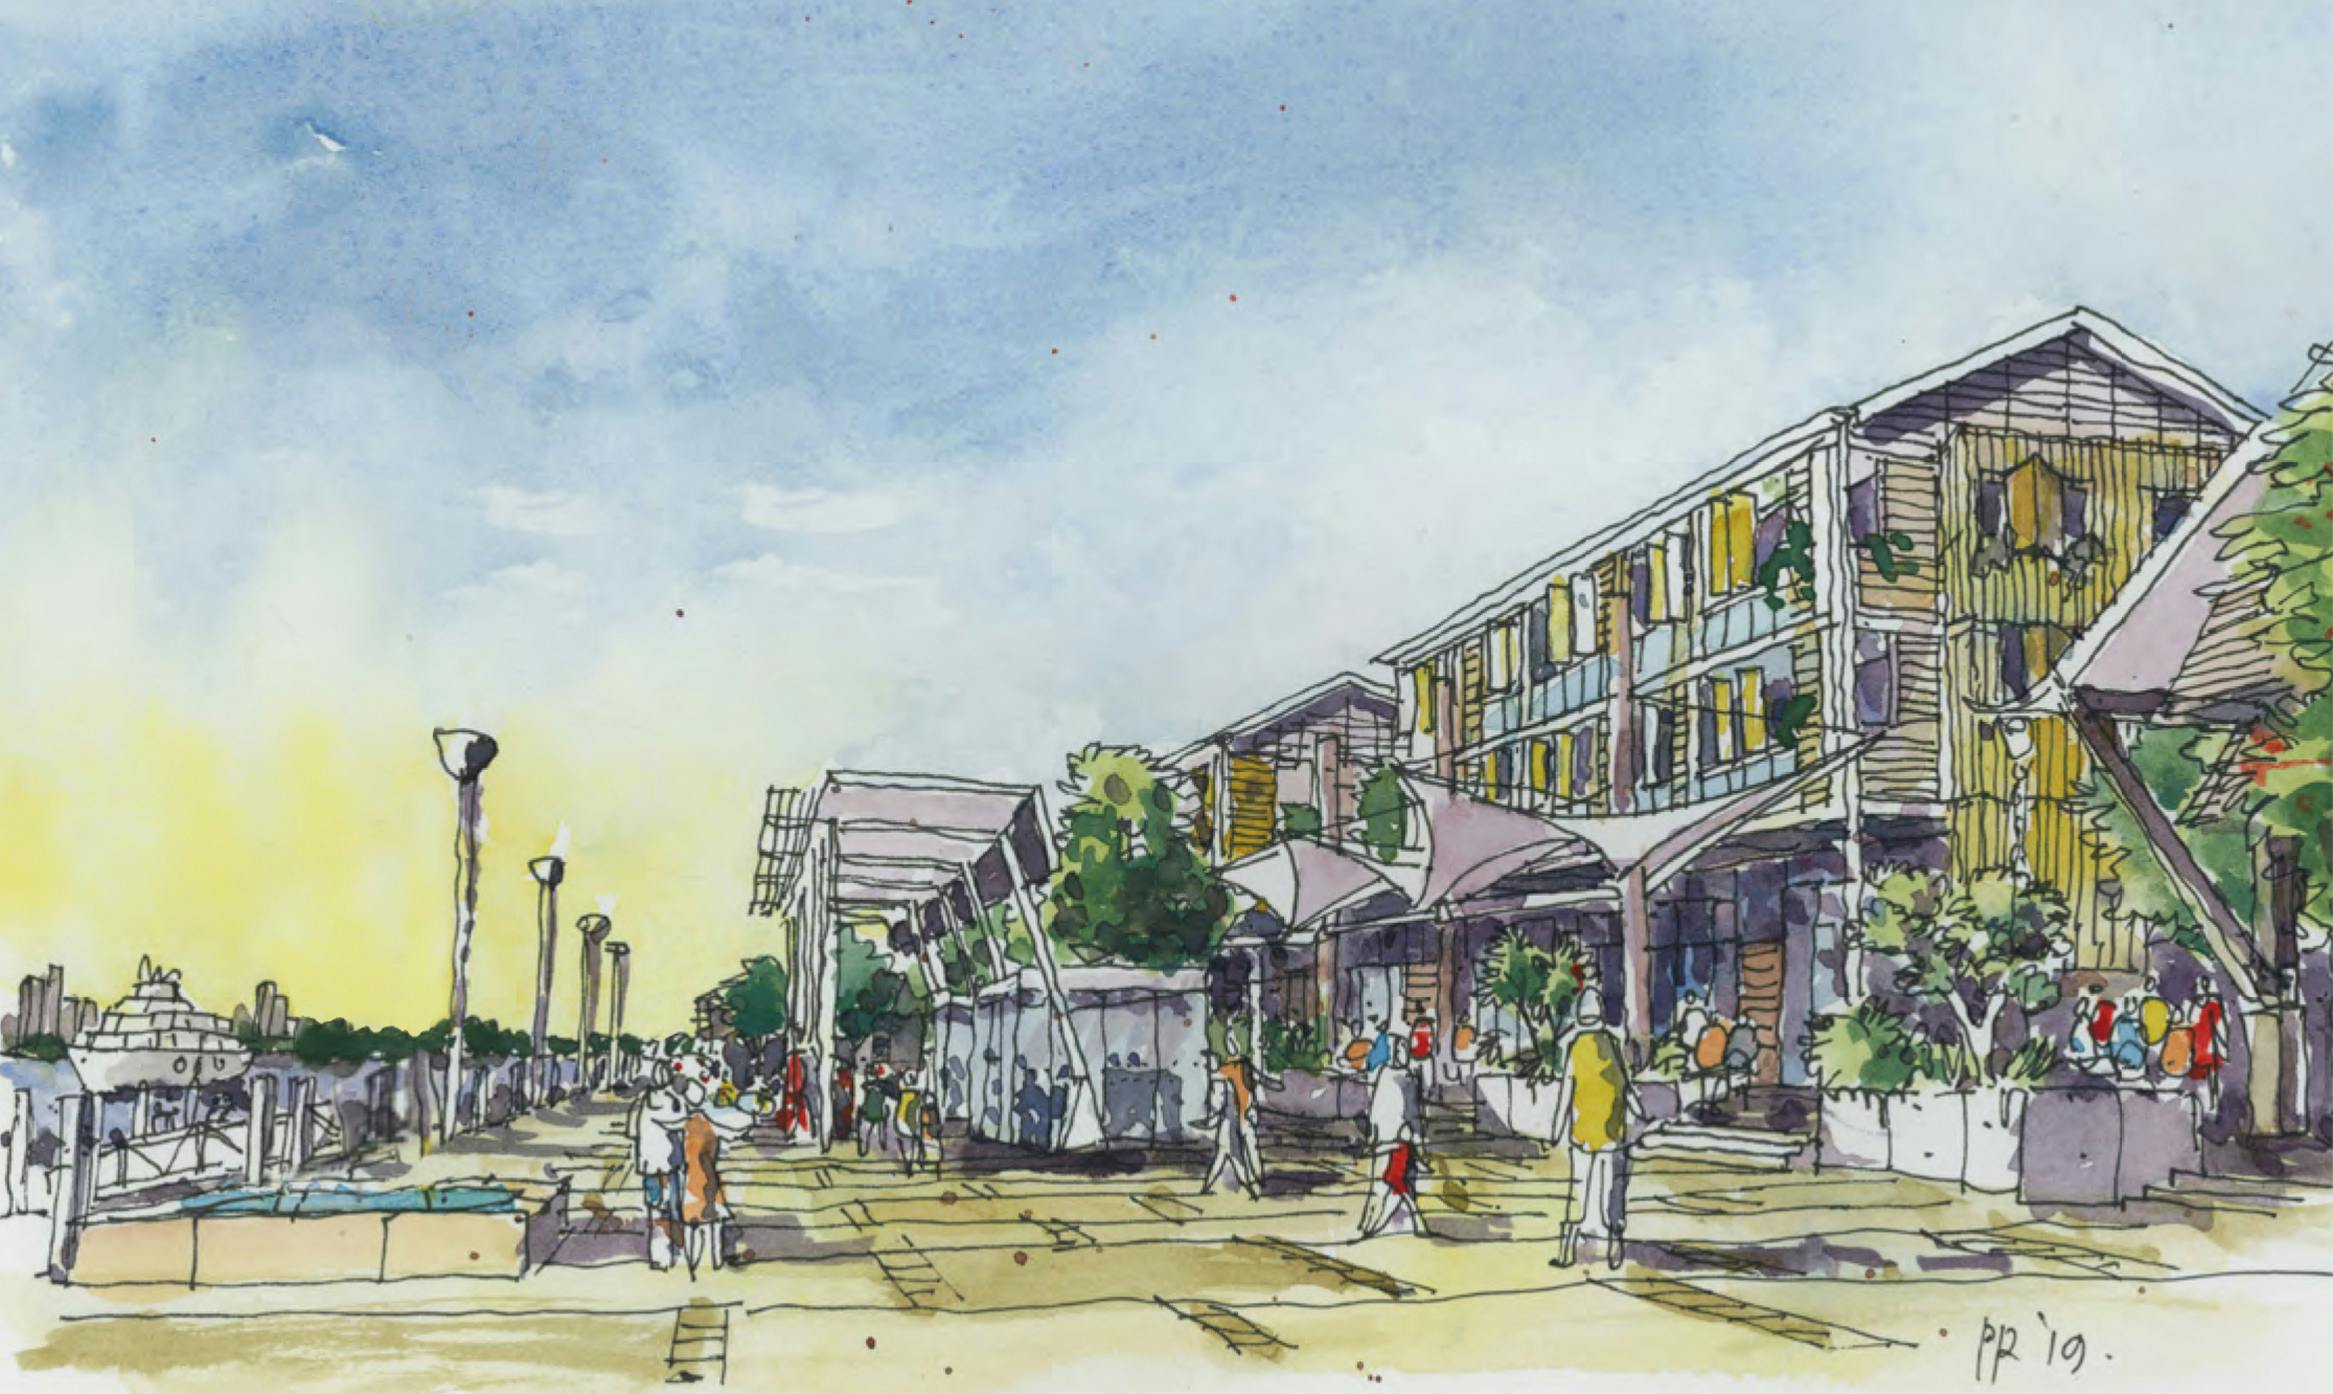 Artist impression of new boardwalk and resort to the south of Sea World.